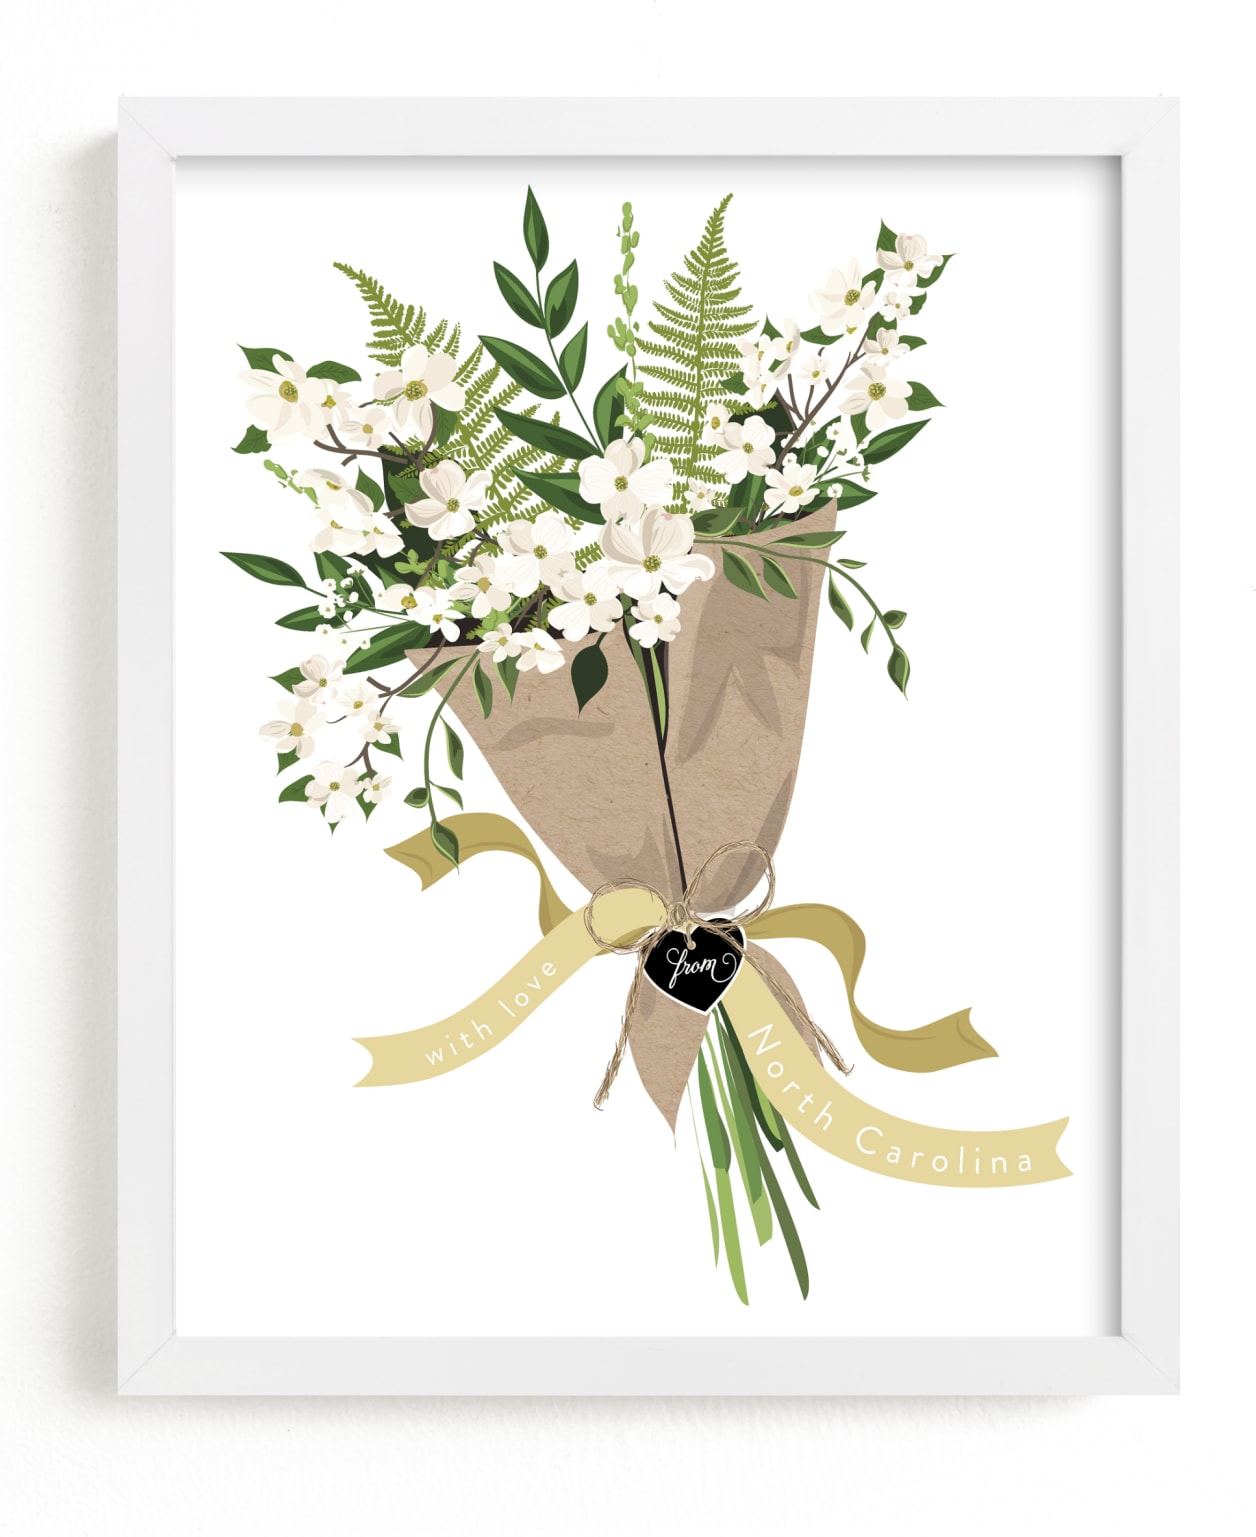 This is a ivory art by Susan Moyal called North Carolina Dogwood Bouquet.